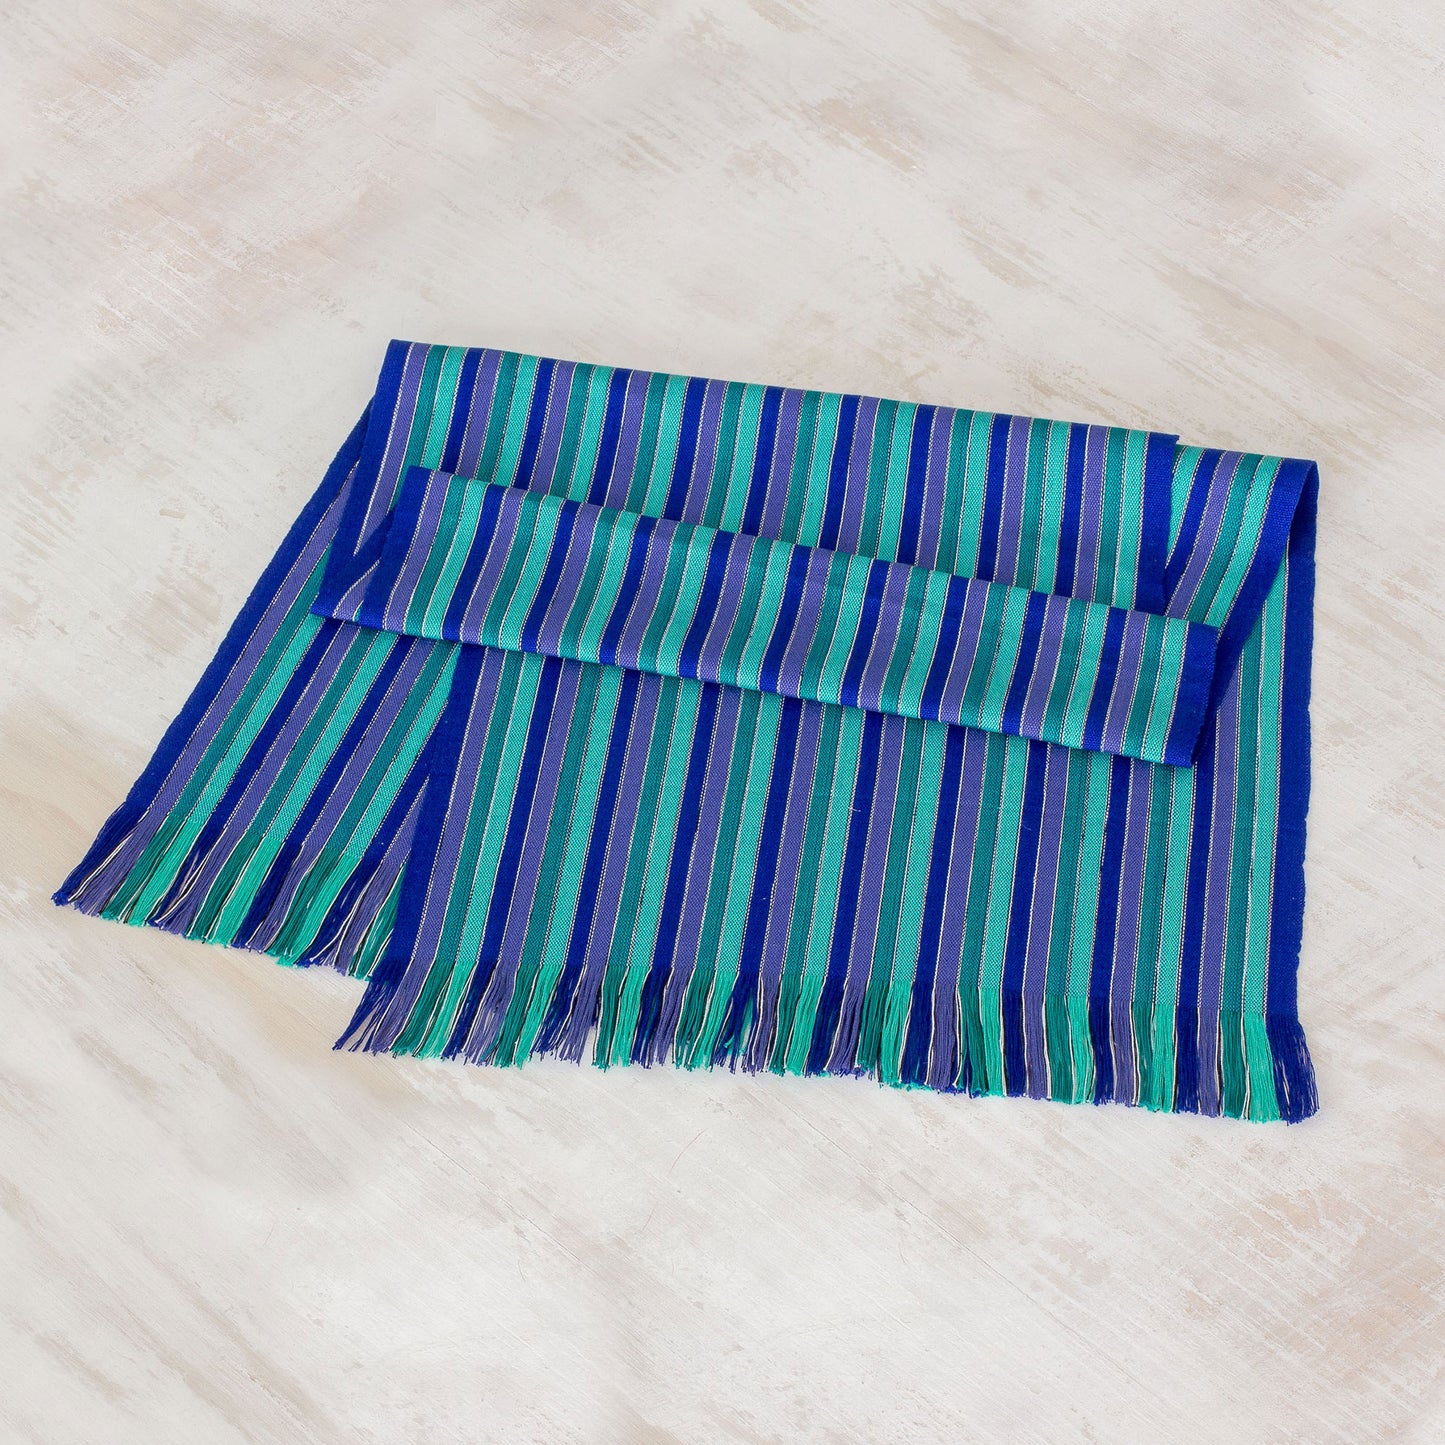 Ocean Memory Blue and Green Striped 100% Cotton Table Runner